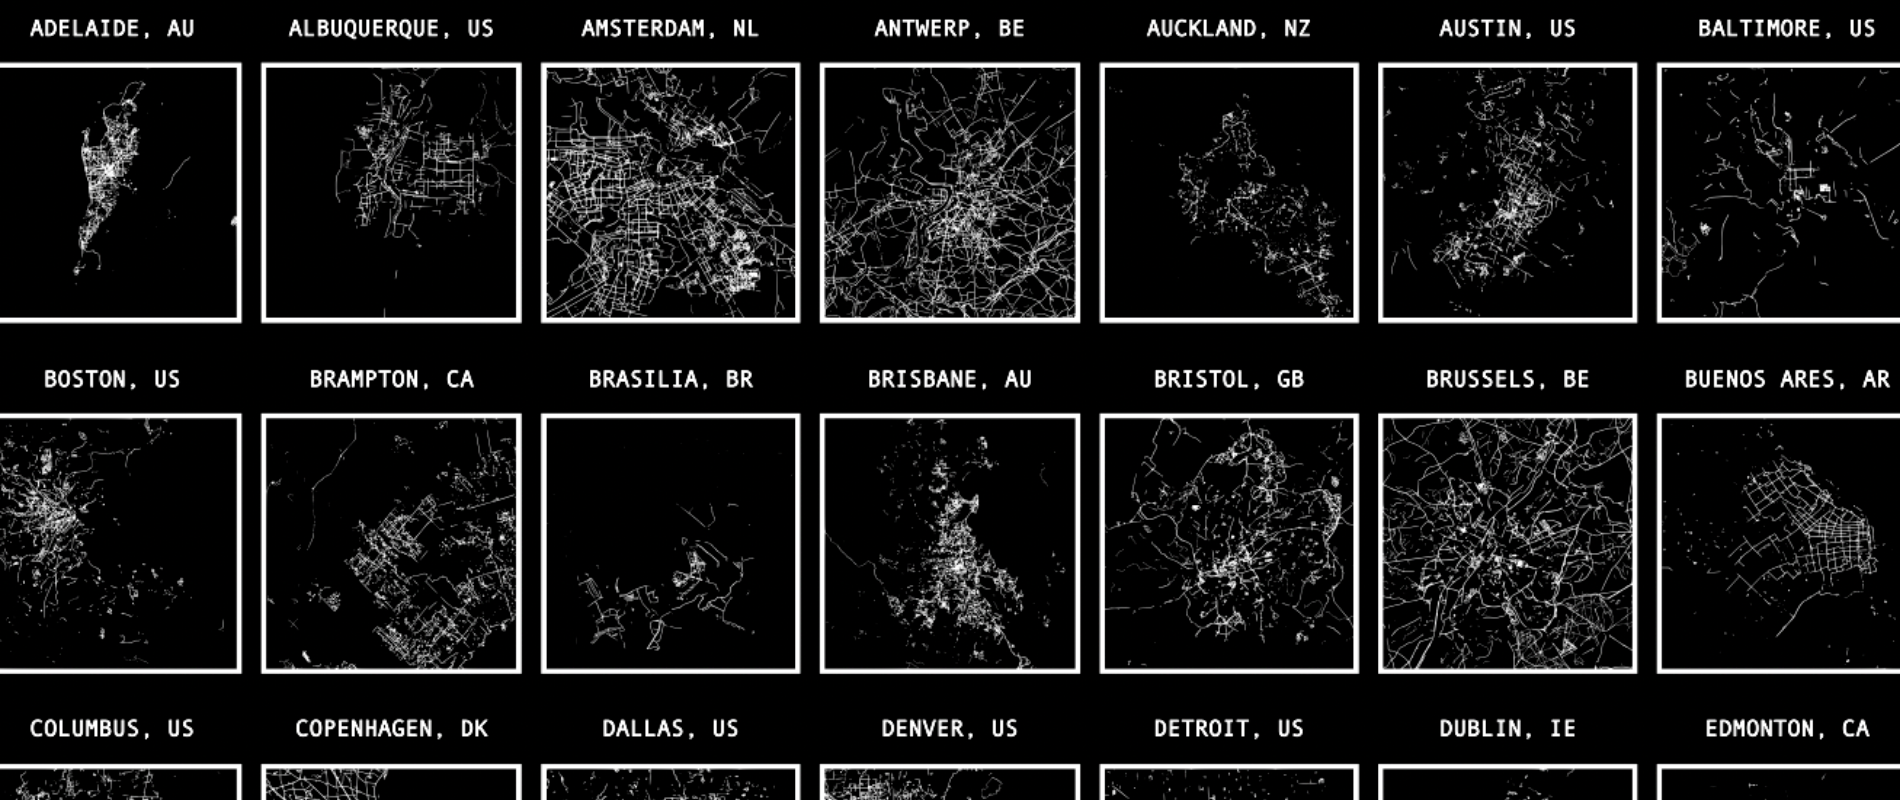 How can urban bike networks be visualized?